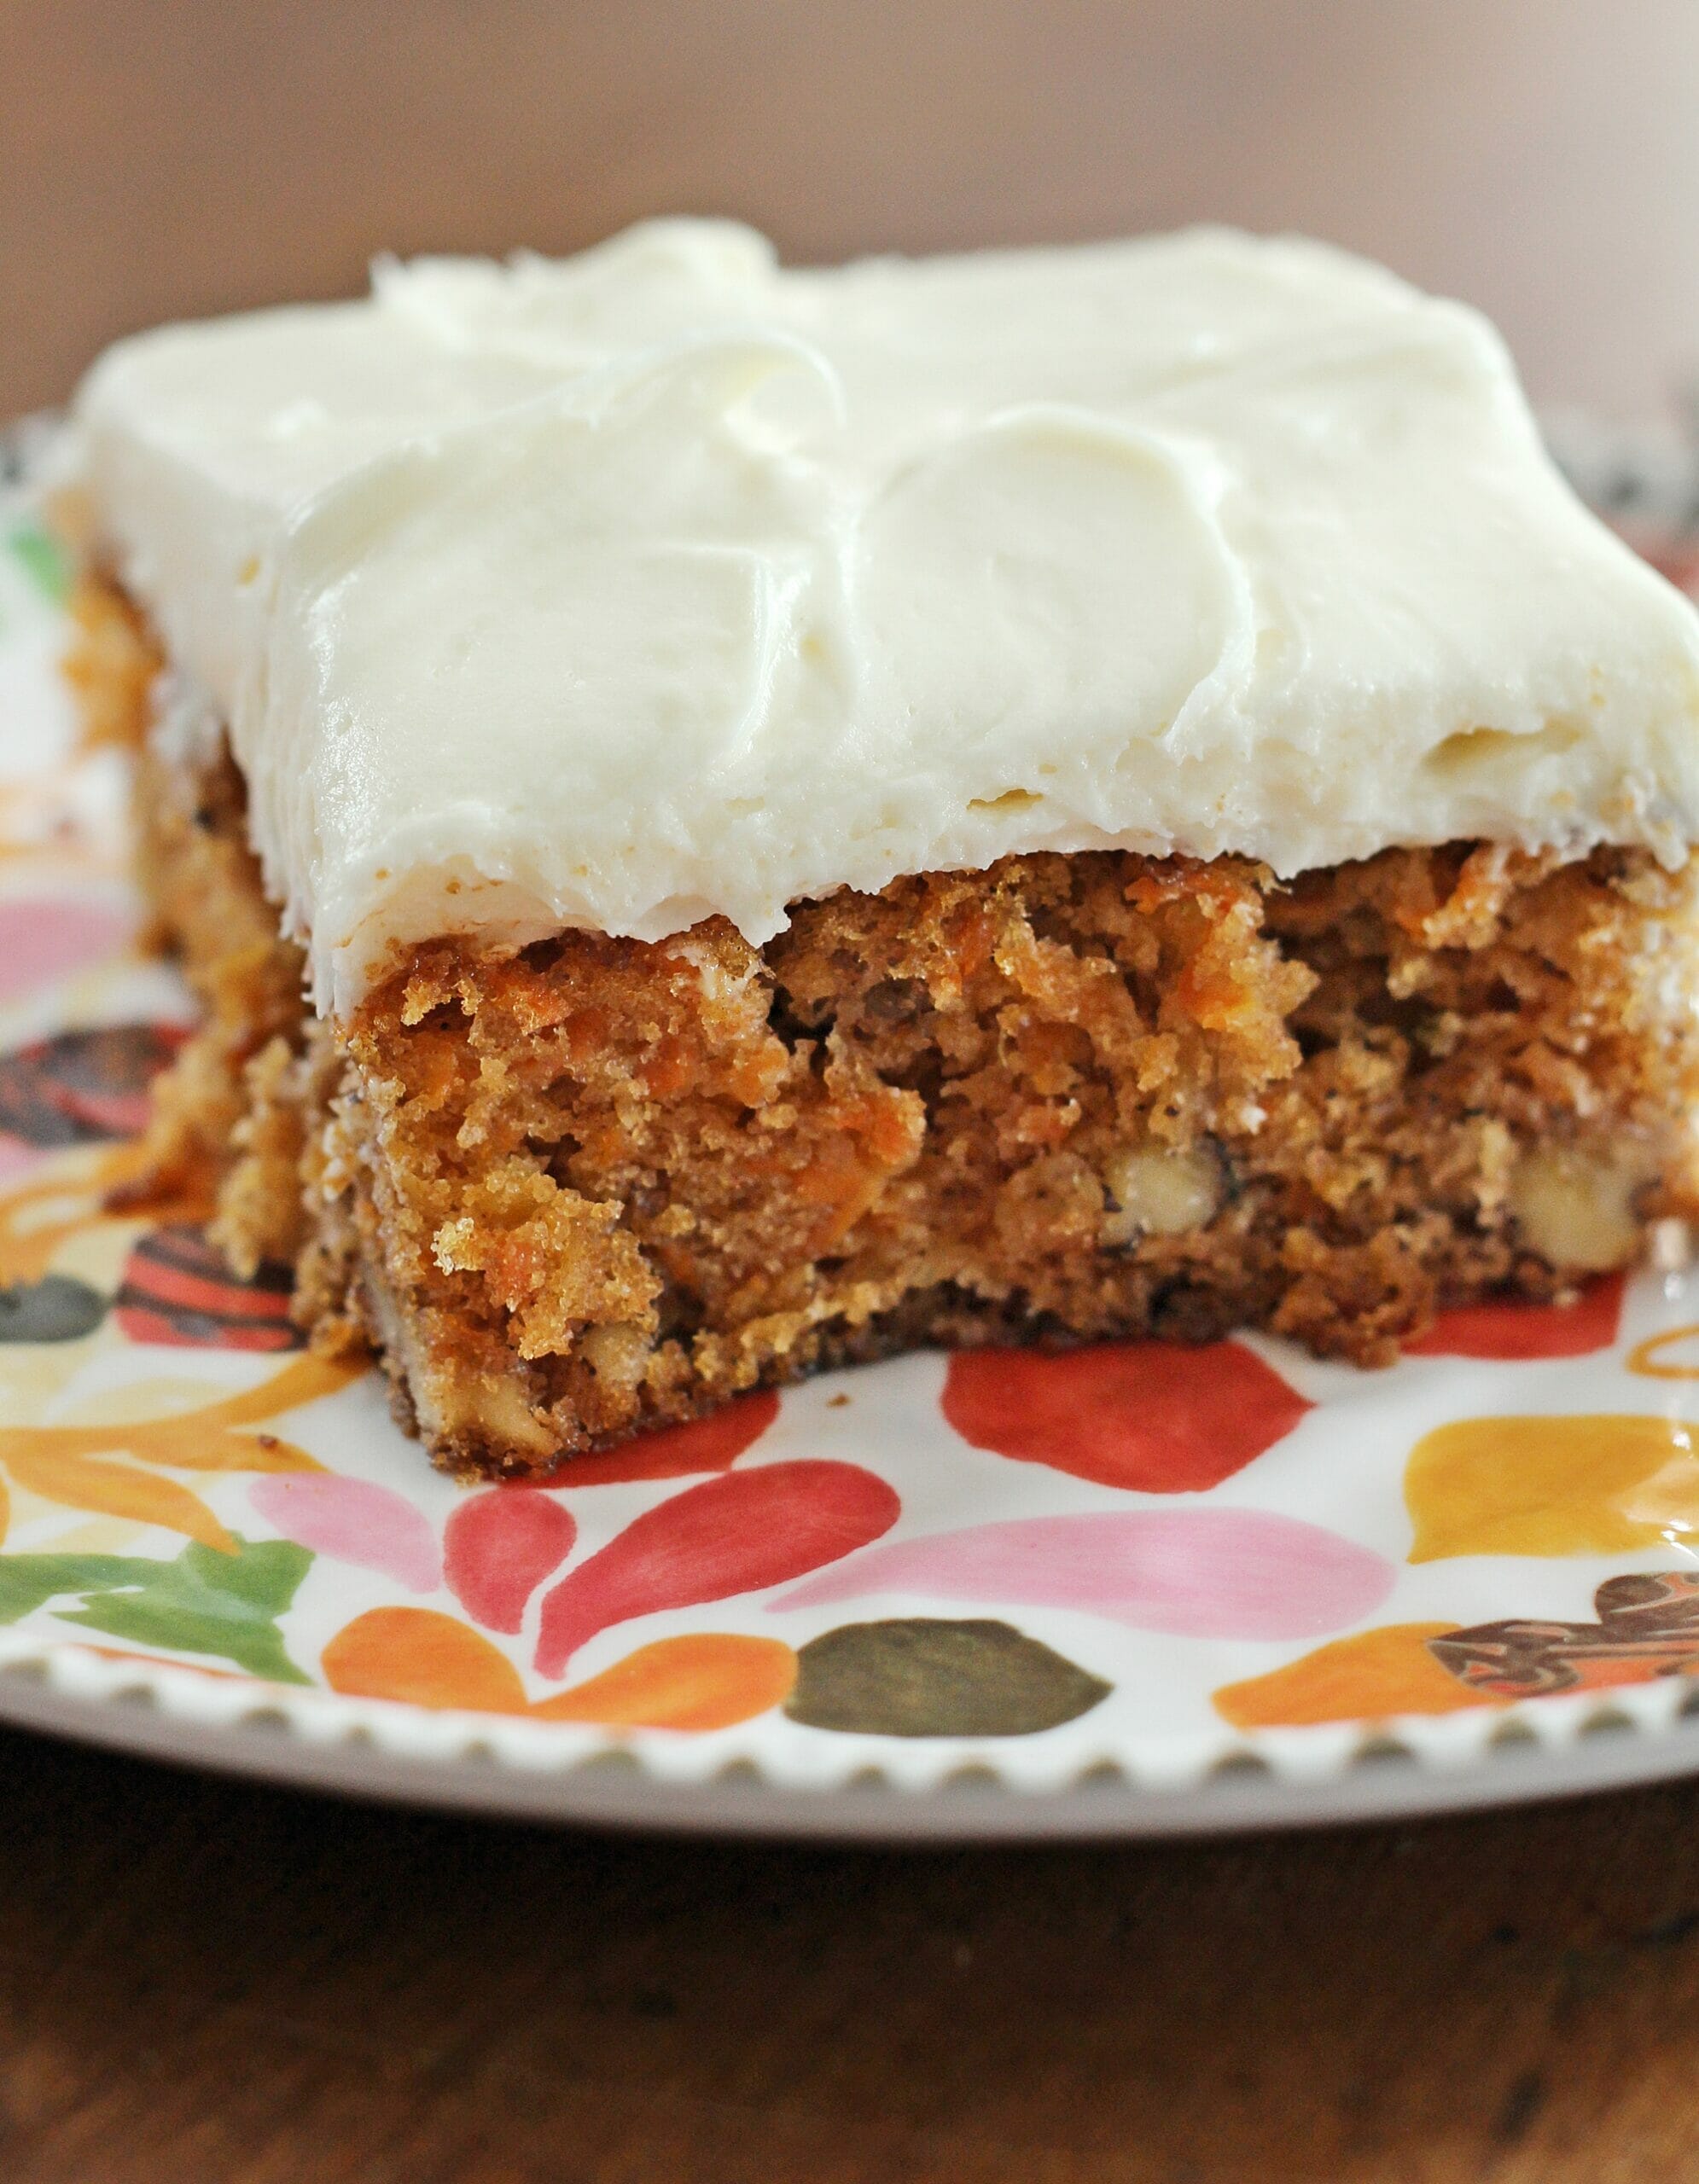 Ina's Carrot Pineapple Cake with Cream Cheese Frosting